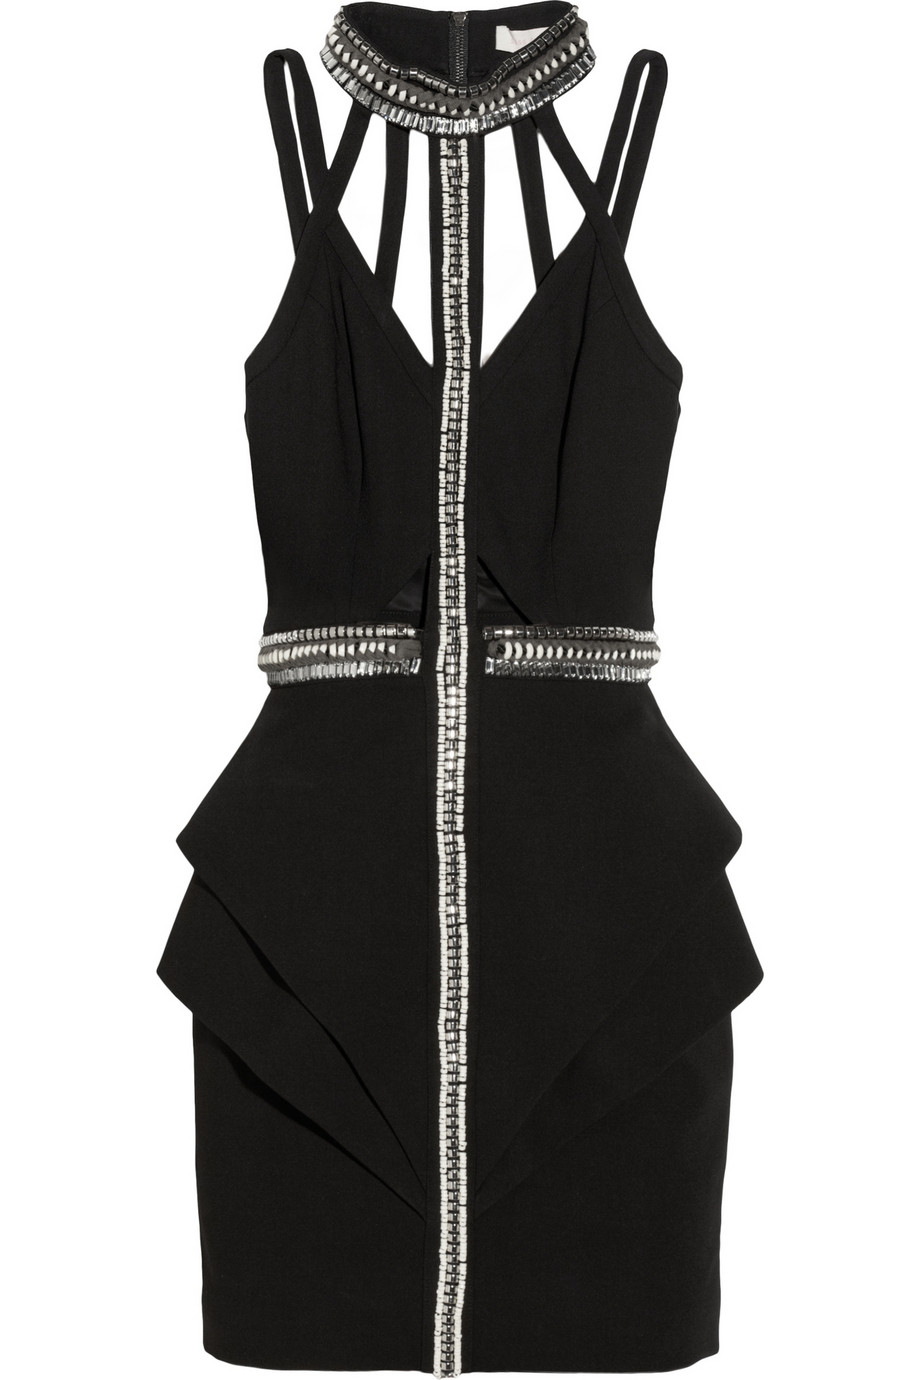 Lyst - Sass & Bide With Virtue Embellished Woven Mini Dress in Black